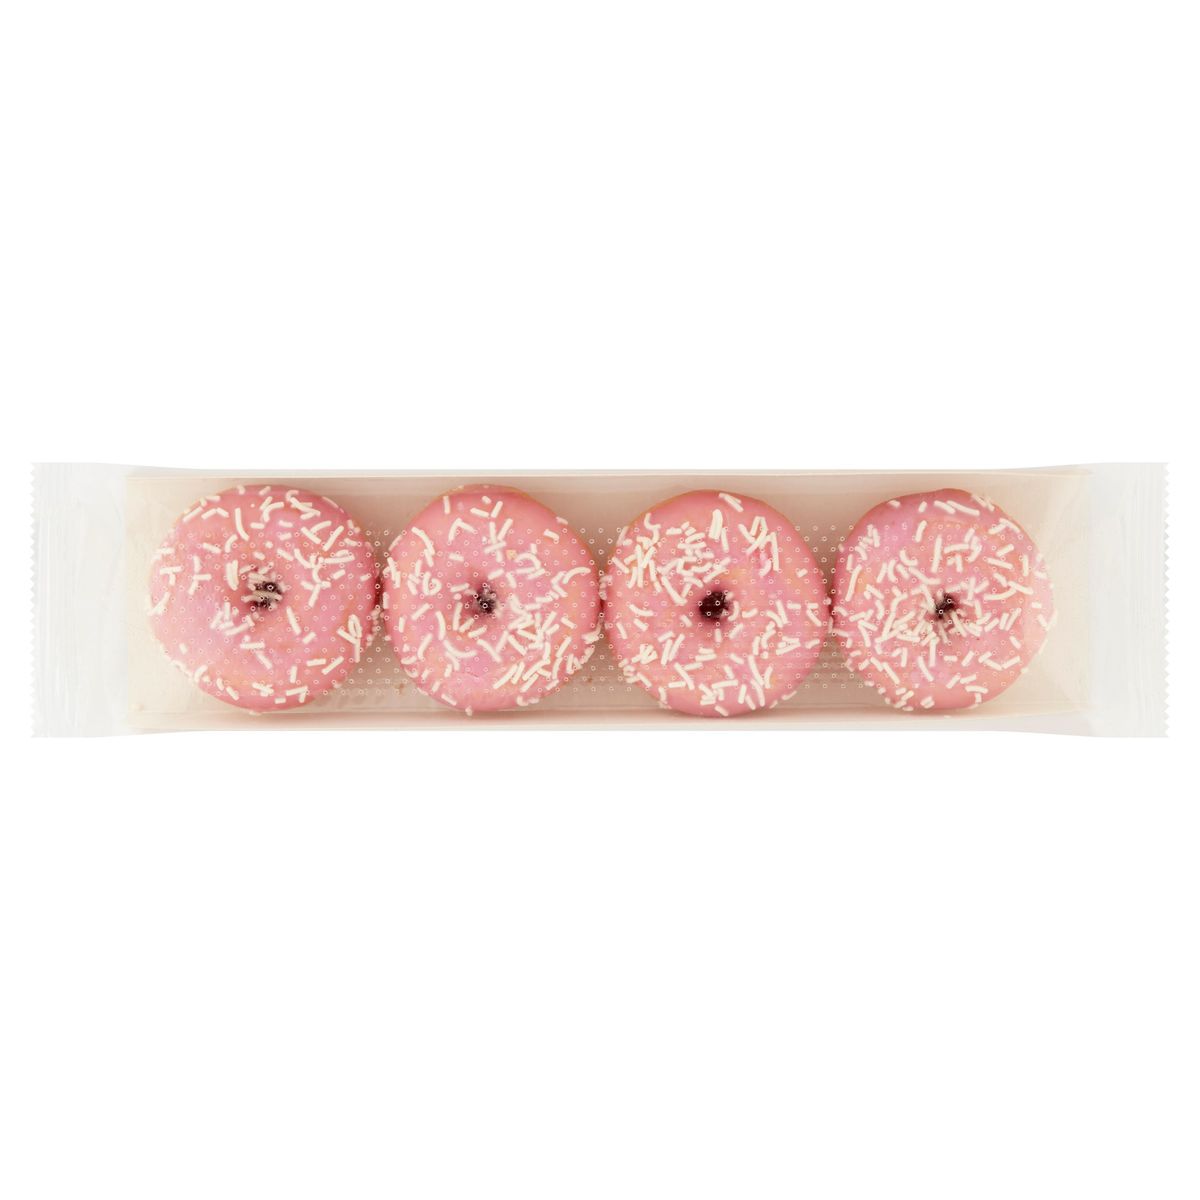 Donuts 4 x 18 g